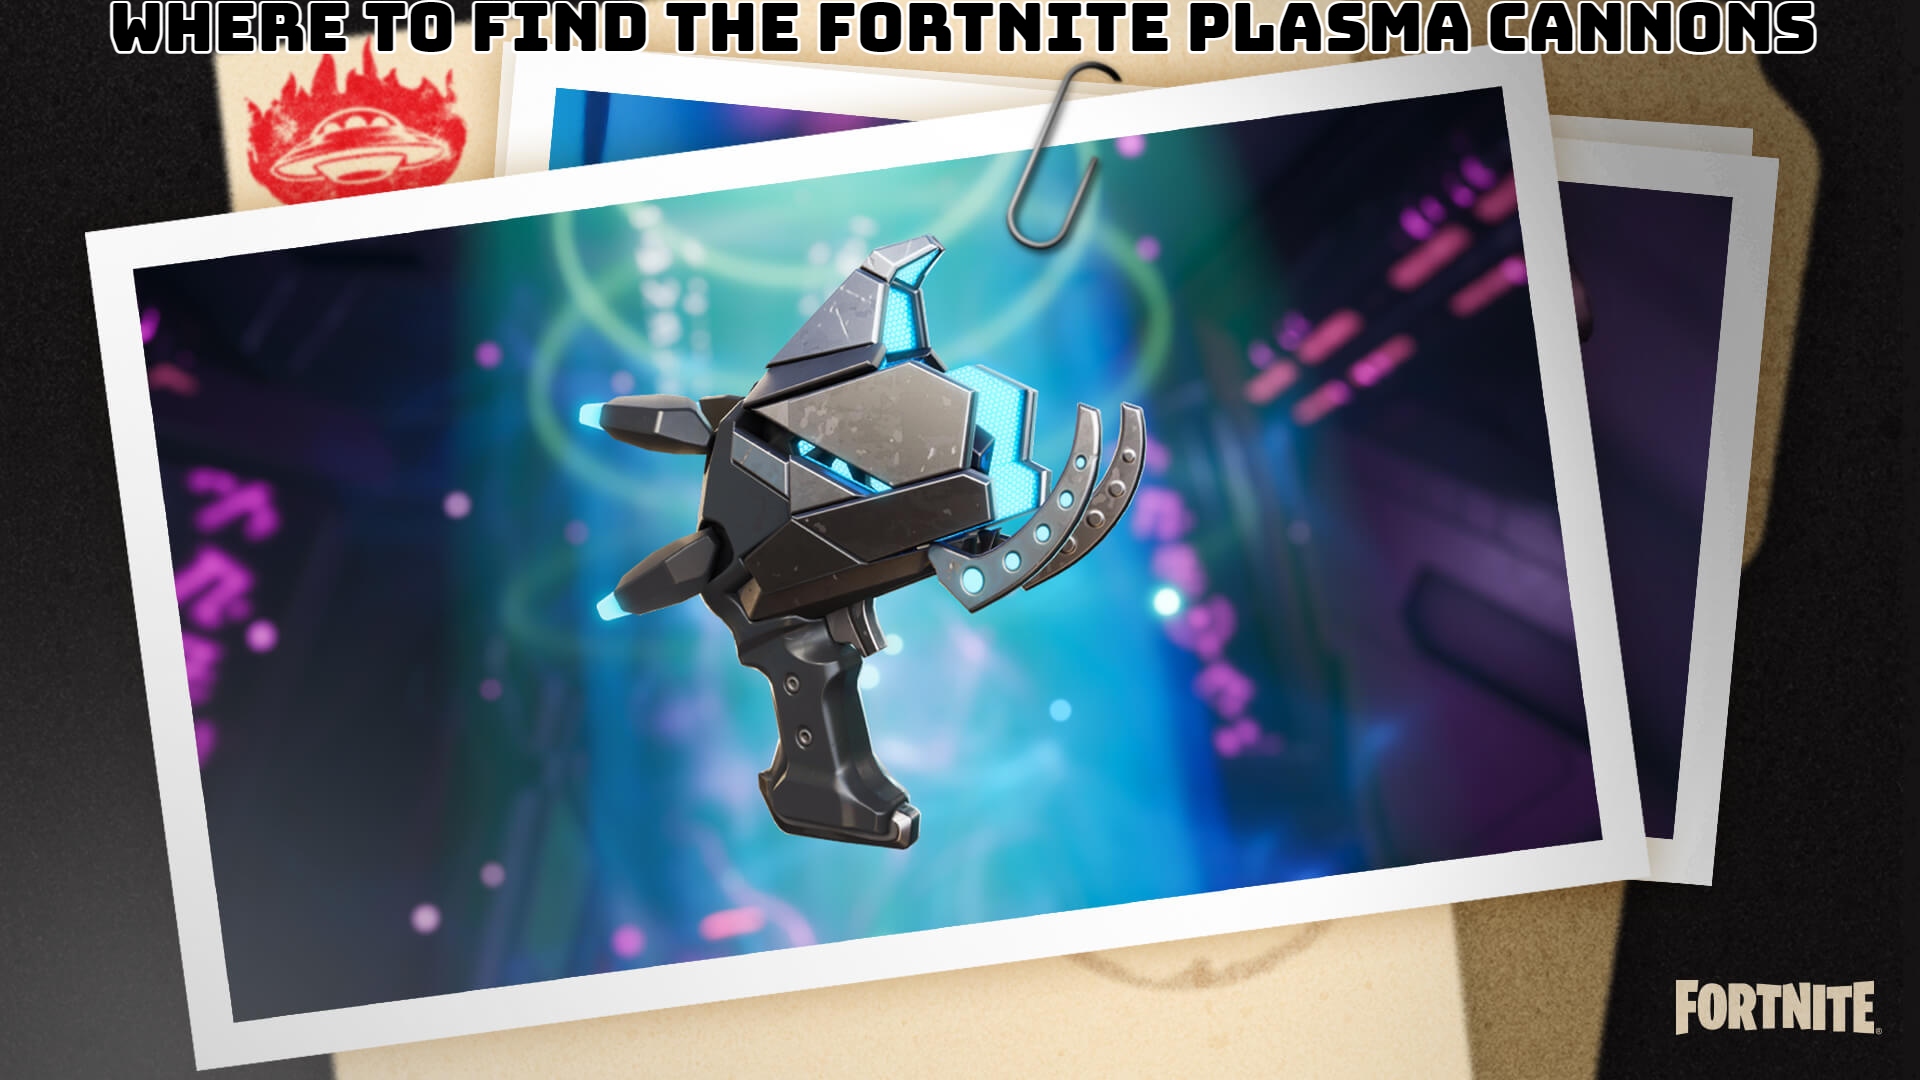 Where to find the Fortnite plasma cannons